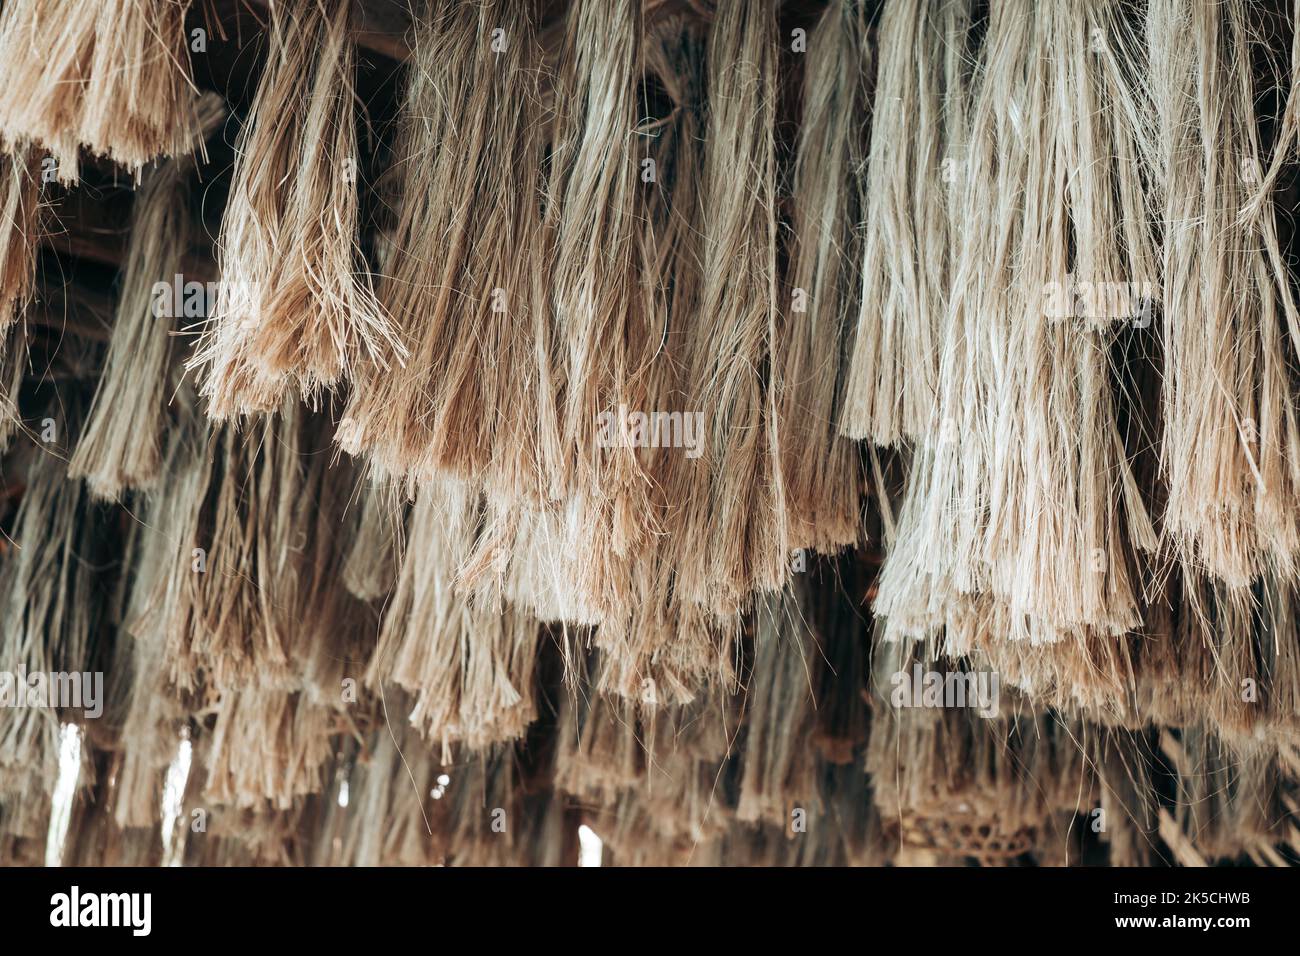 Hanging strong Abaca plant fibers, a natural leaf fiber, also called Manila hemp or Musa textilis from Banana tree leafstalk native to Philippines Stock Photo